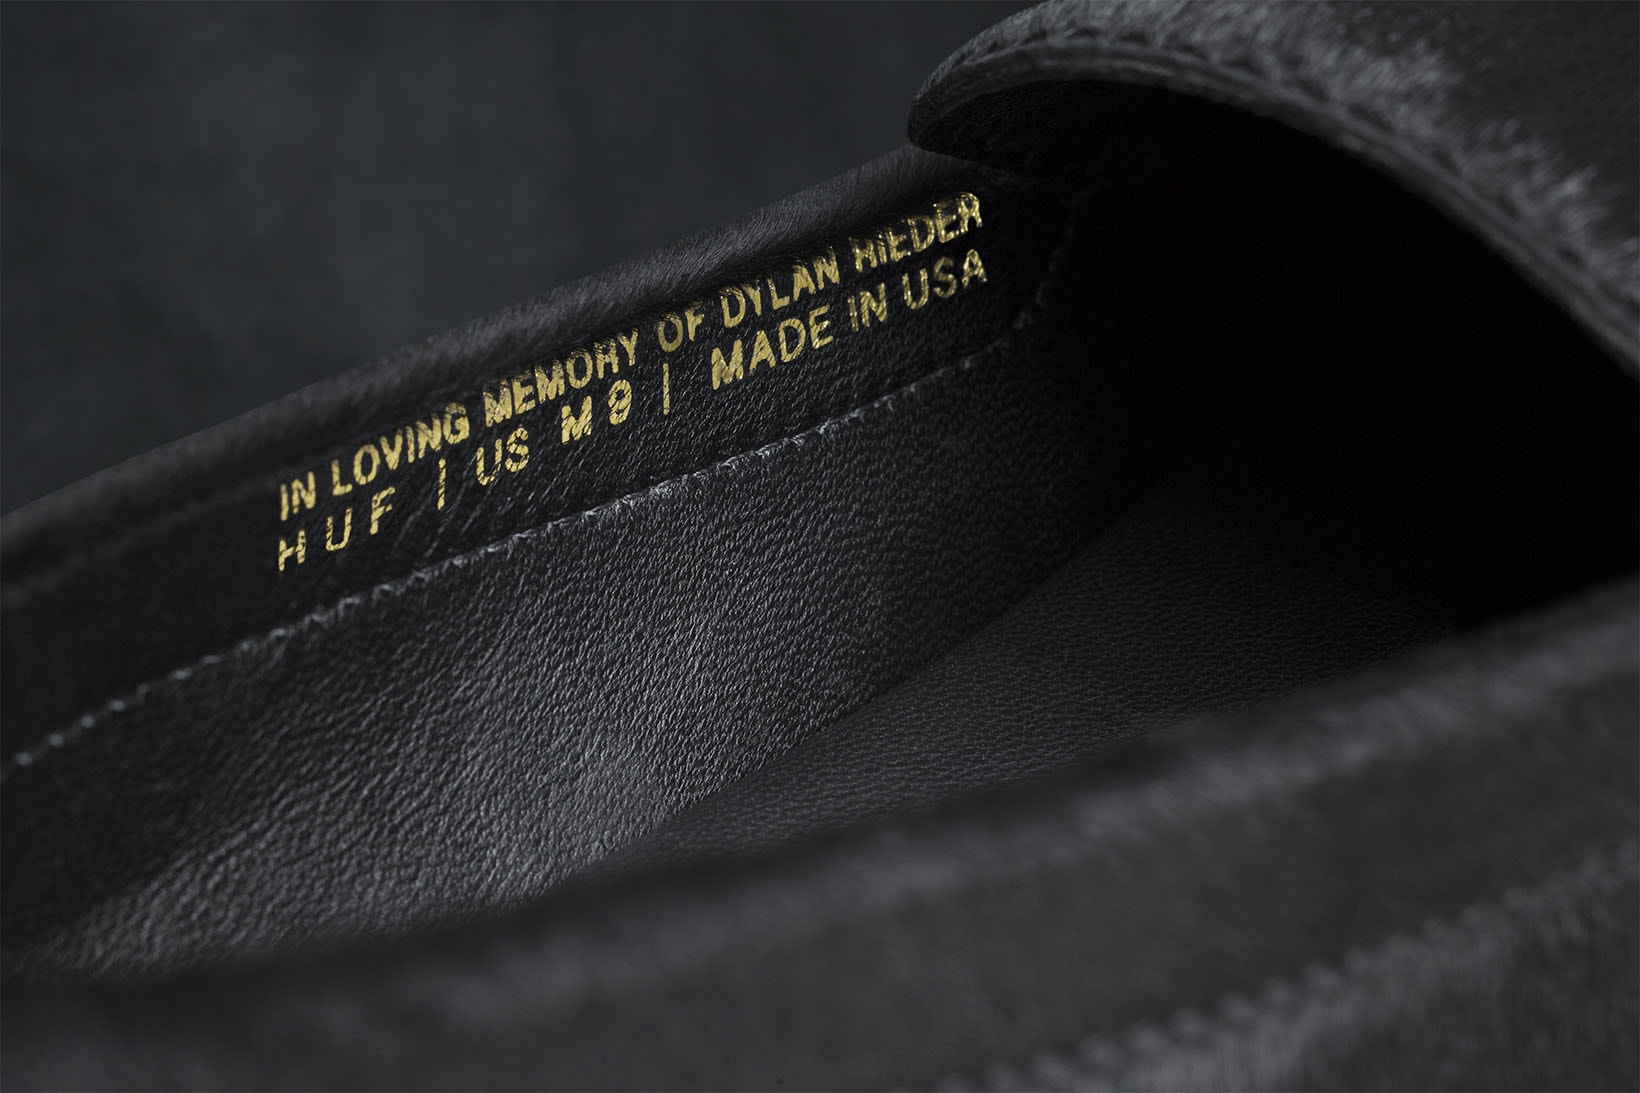 HUF Dylan Rieder Driver Calf Hair may 26 27 29 2018 release date info drop sneakers shoes footwear vibram loafer signature